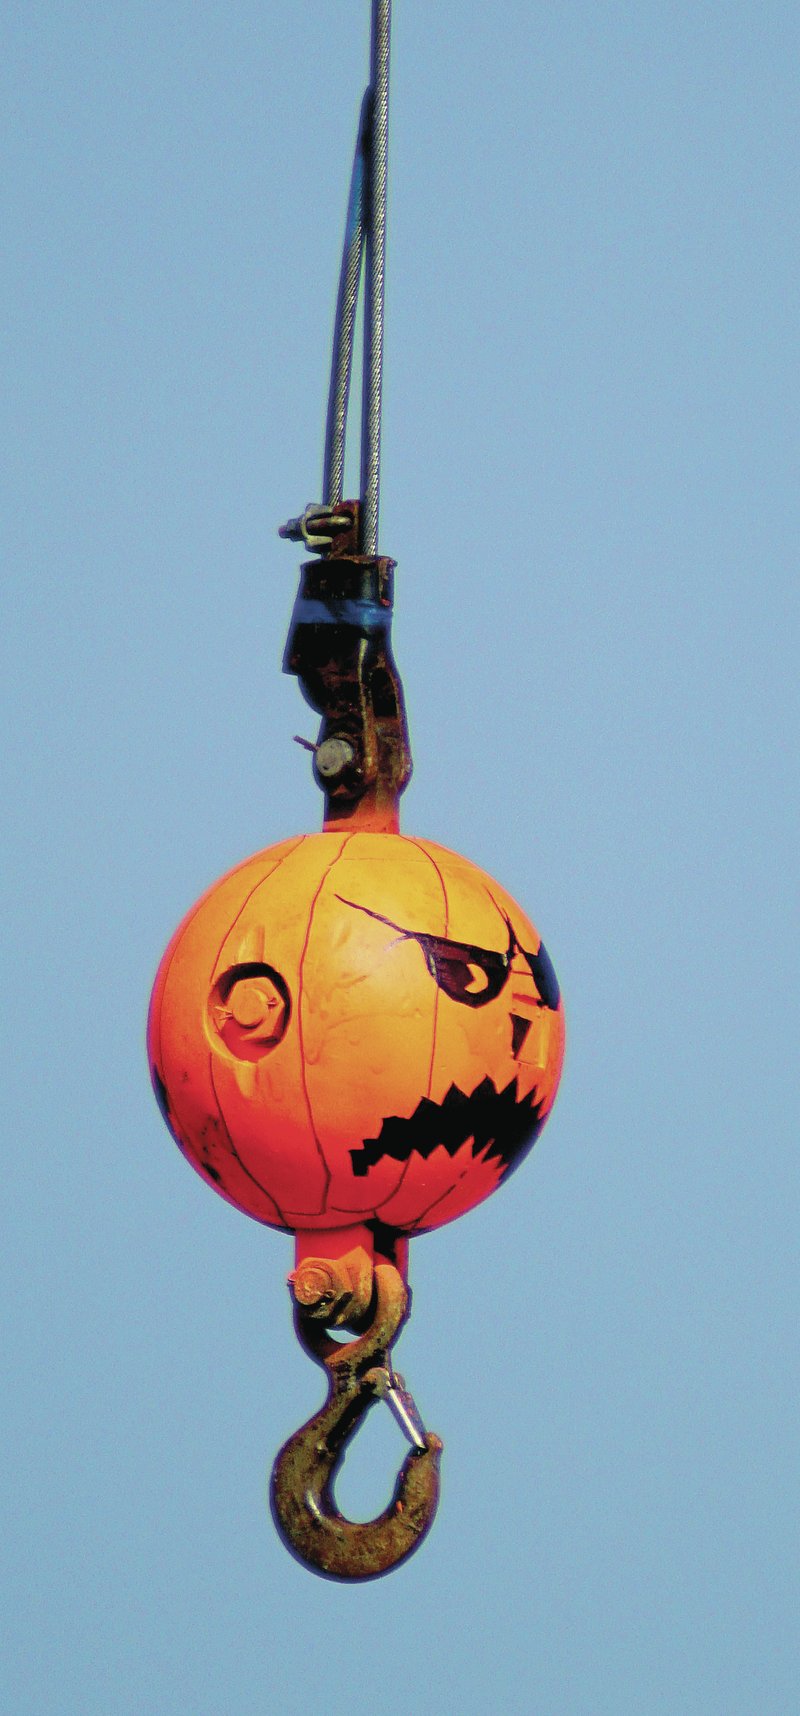 Photo by Randy Moll The weight on a crane at SWEPCO&#8217;s construction storage area near Gentry reflects a bit of the Halloween spirit.